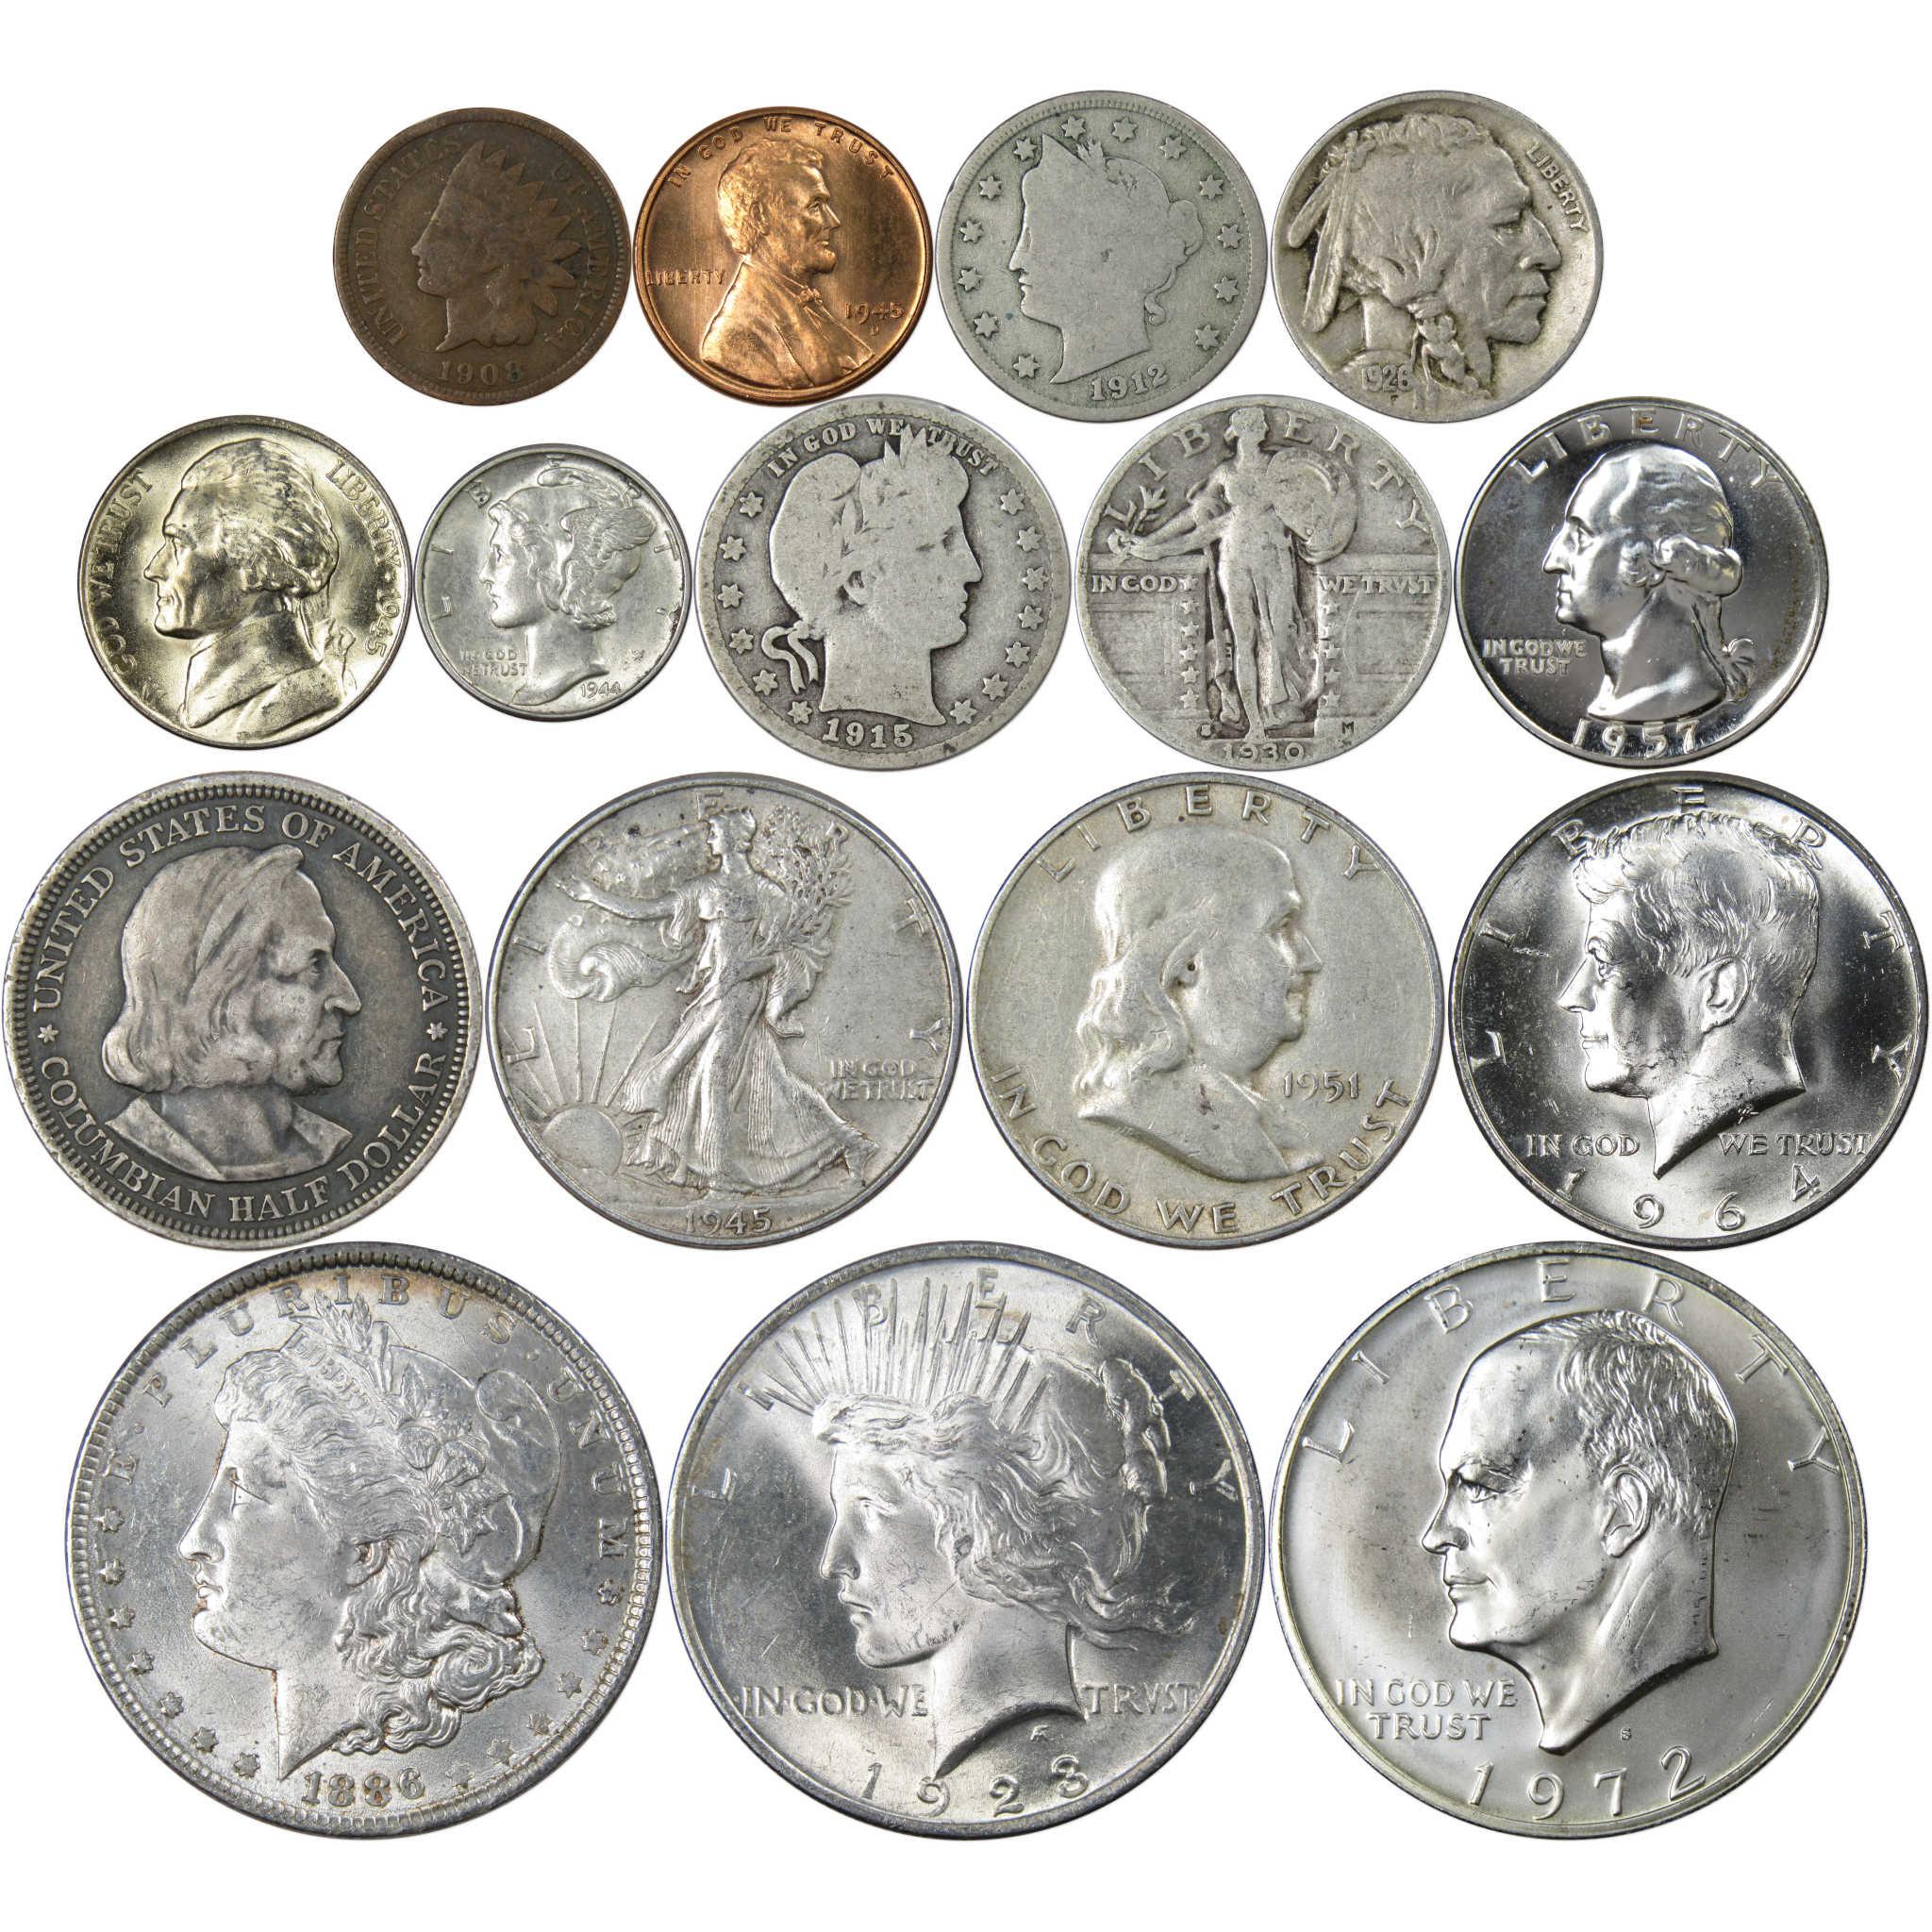 Collector's Set of 16 U.S. Coins - Circulated, Uncirculated & Proof